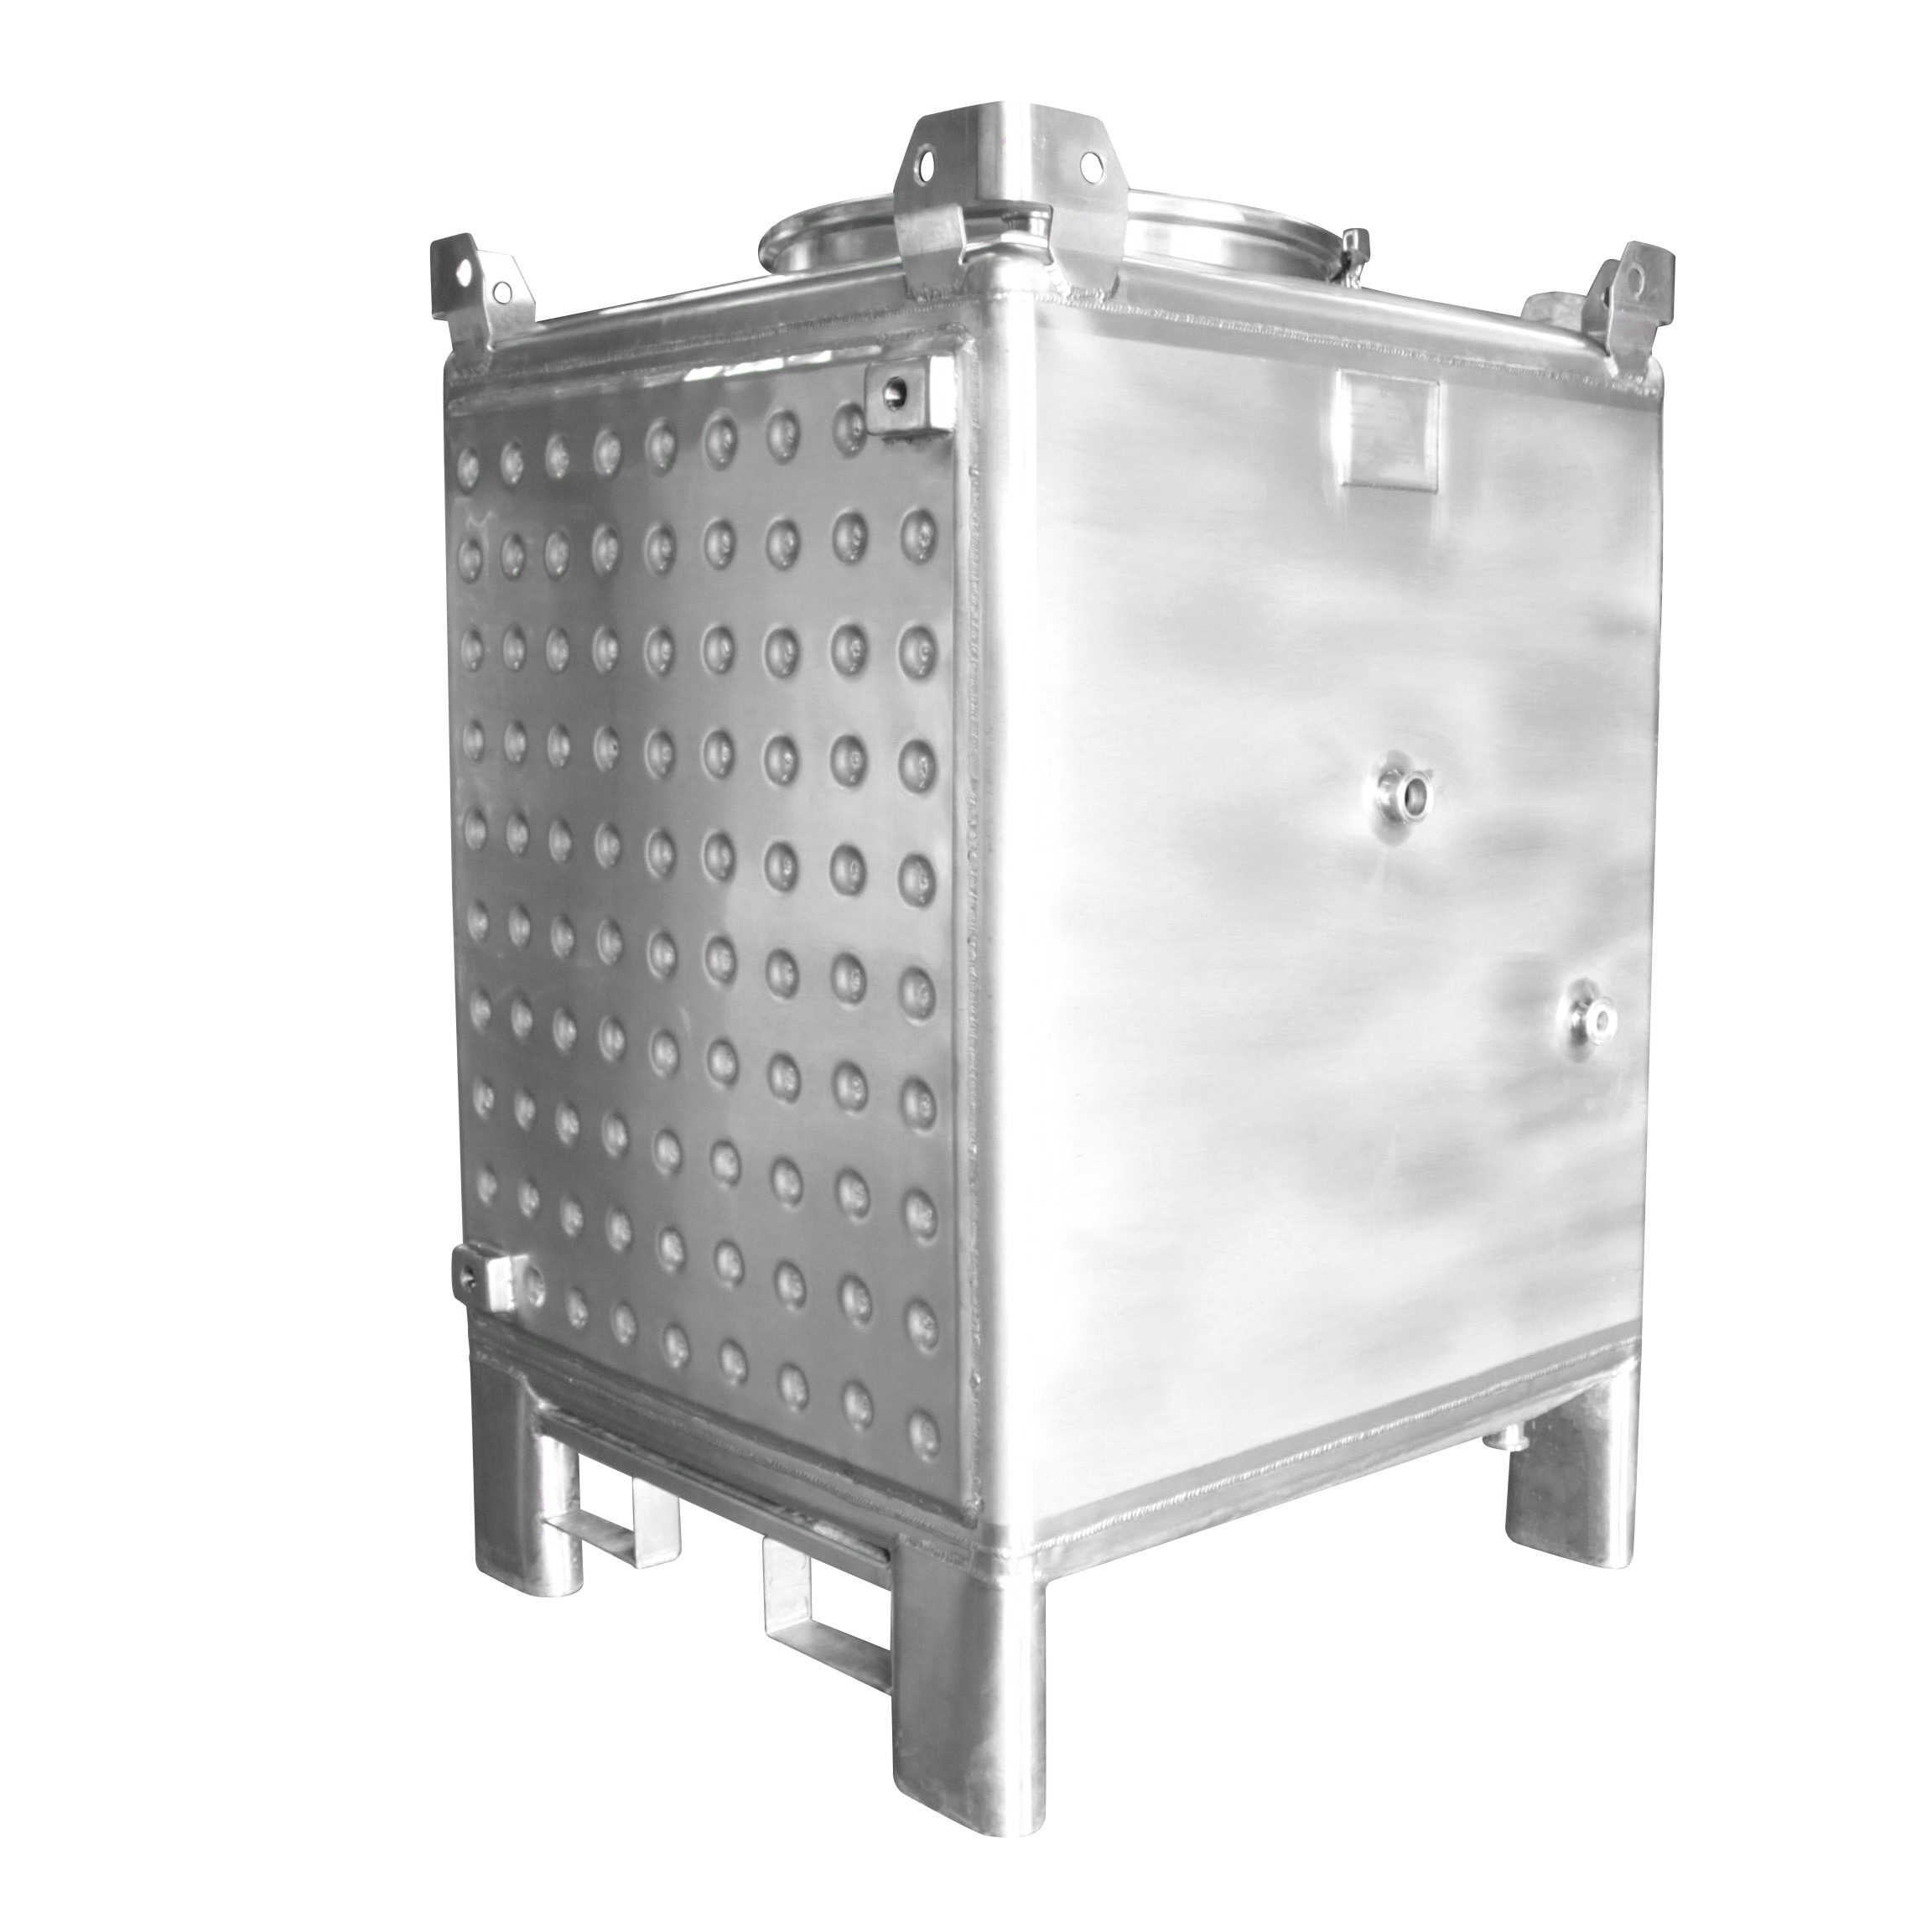 565 Gallon Food Grade Jacketed Stainless IBC Tote - Cedarstone Industry